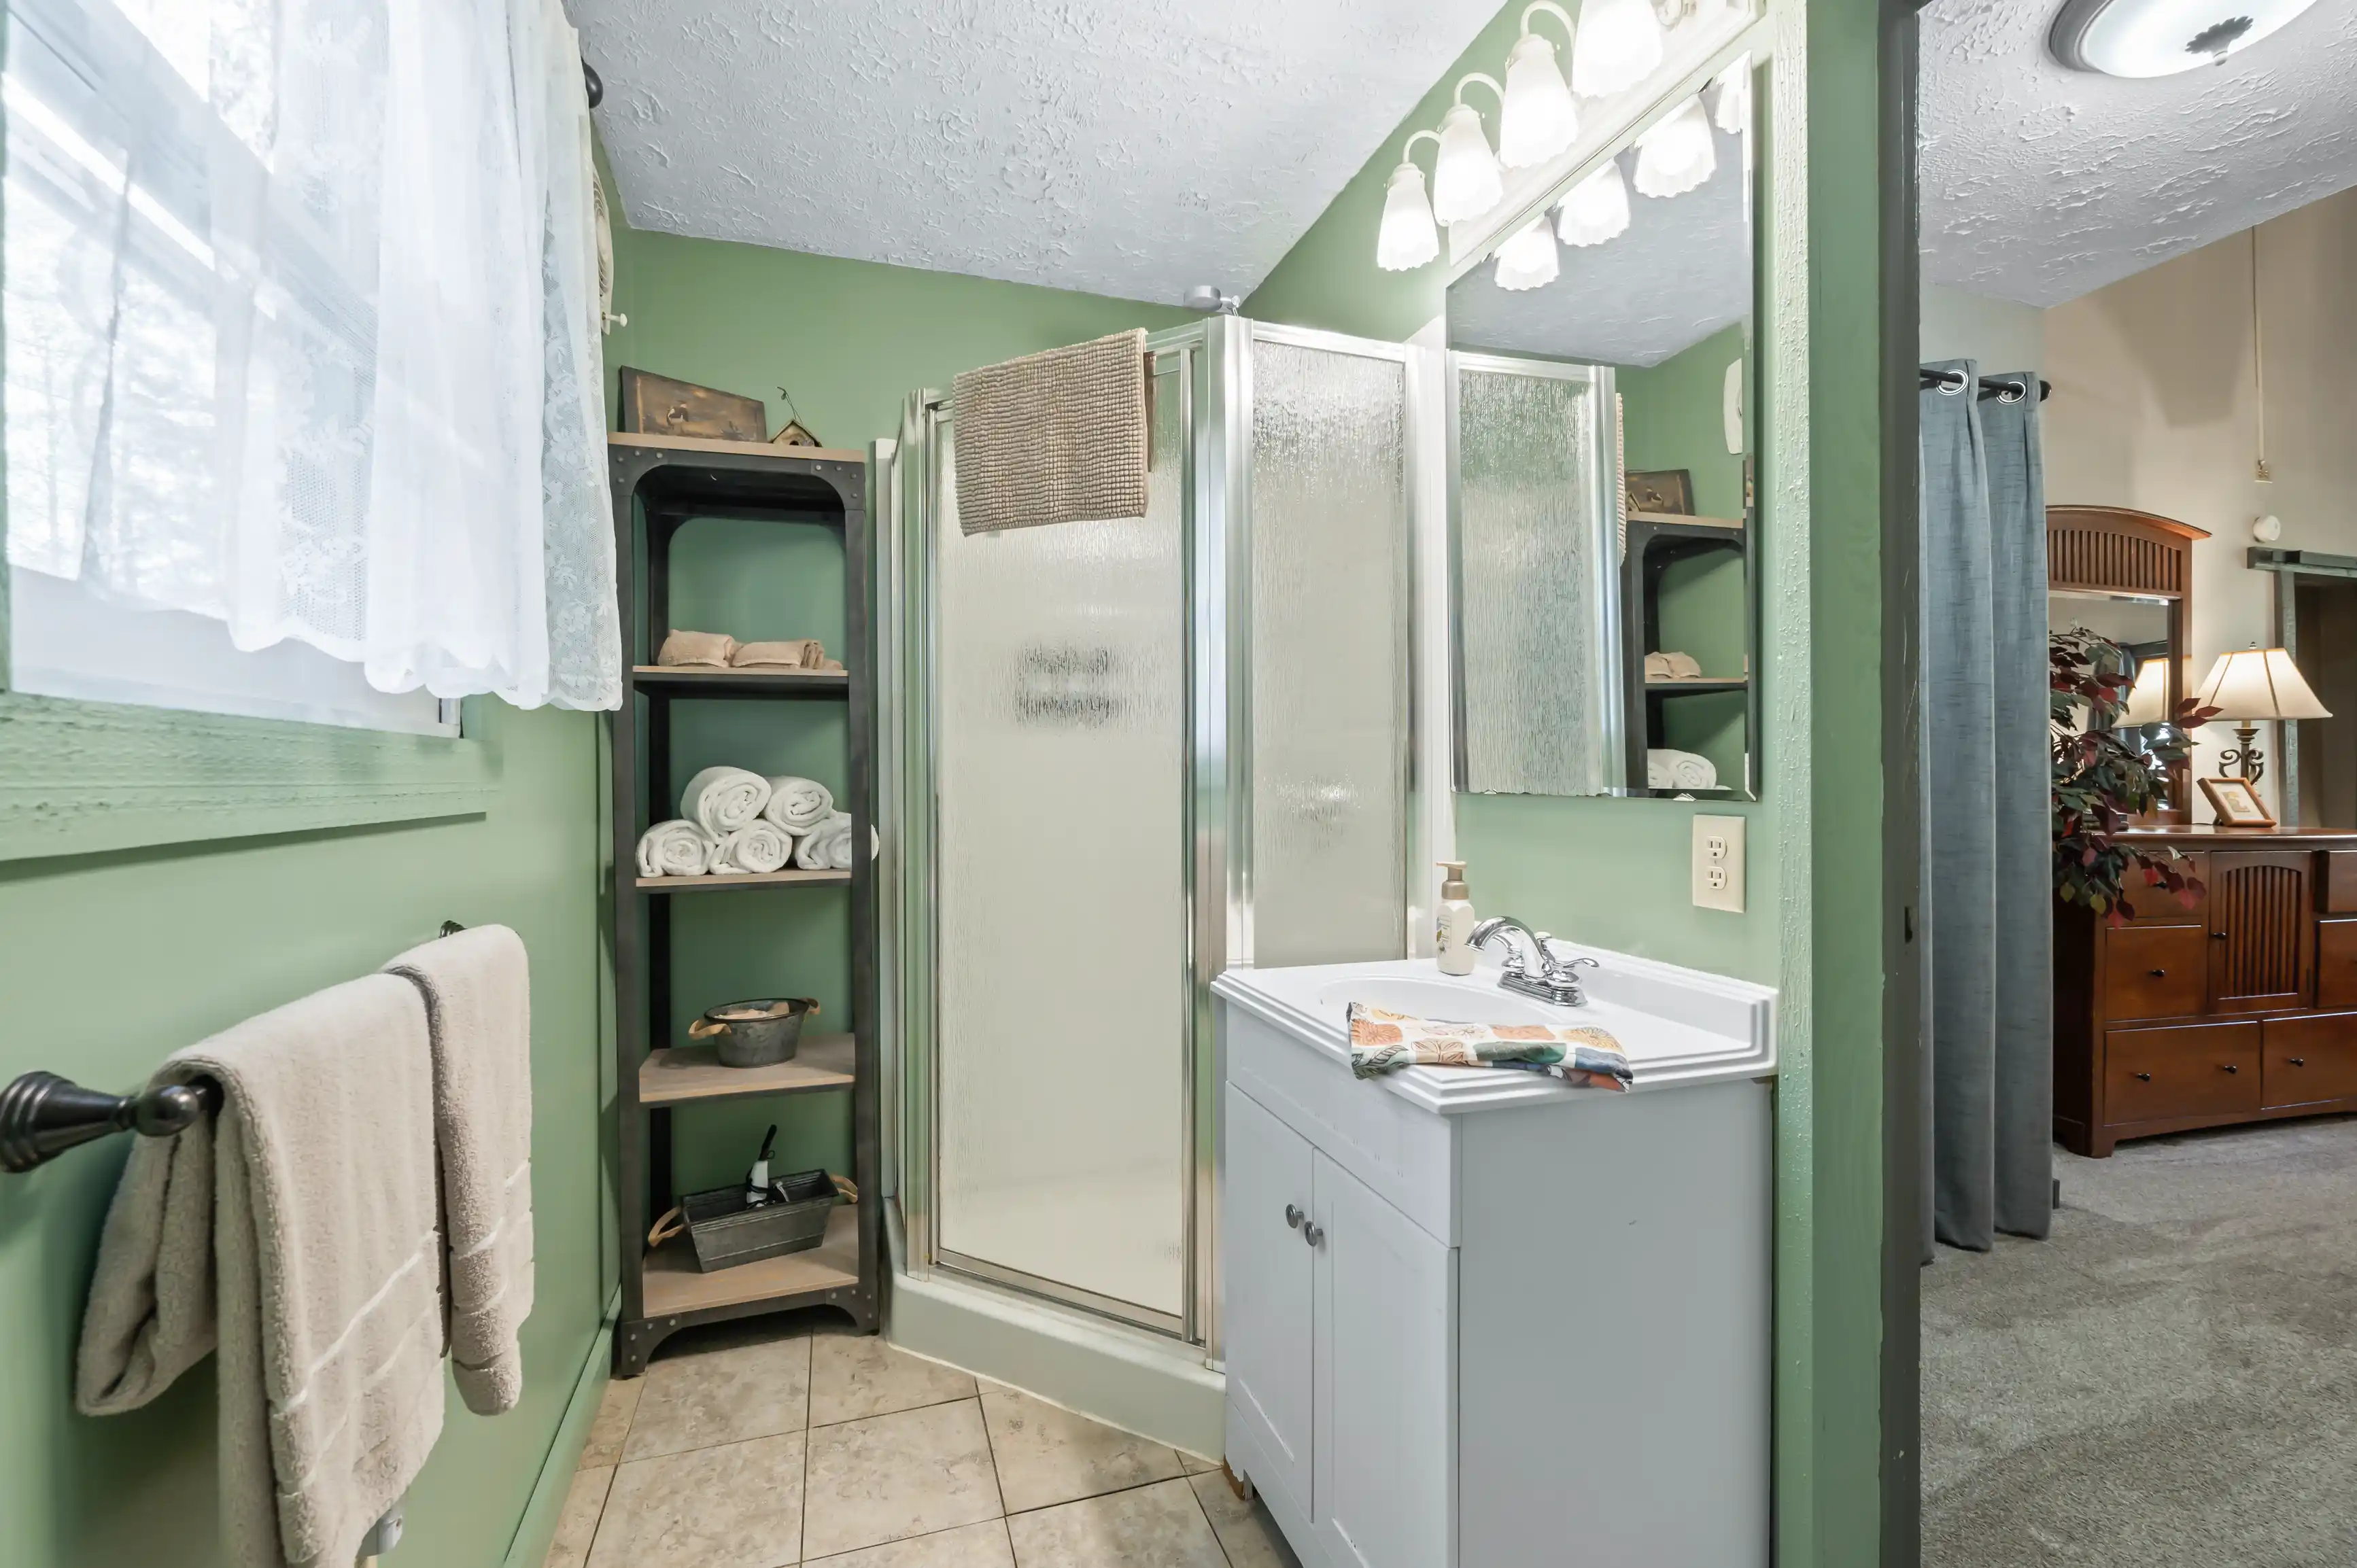 Bathroom interior with light green walls, shower stall, vanity with sink, mirror with overhead lights, towel rack, and adjacent room visible in the background.